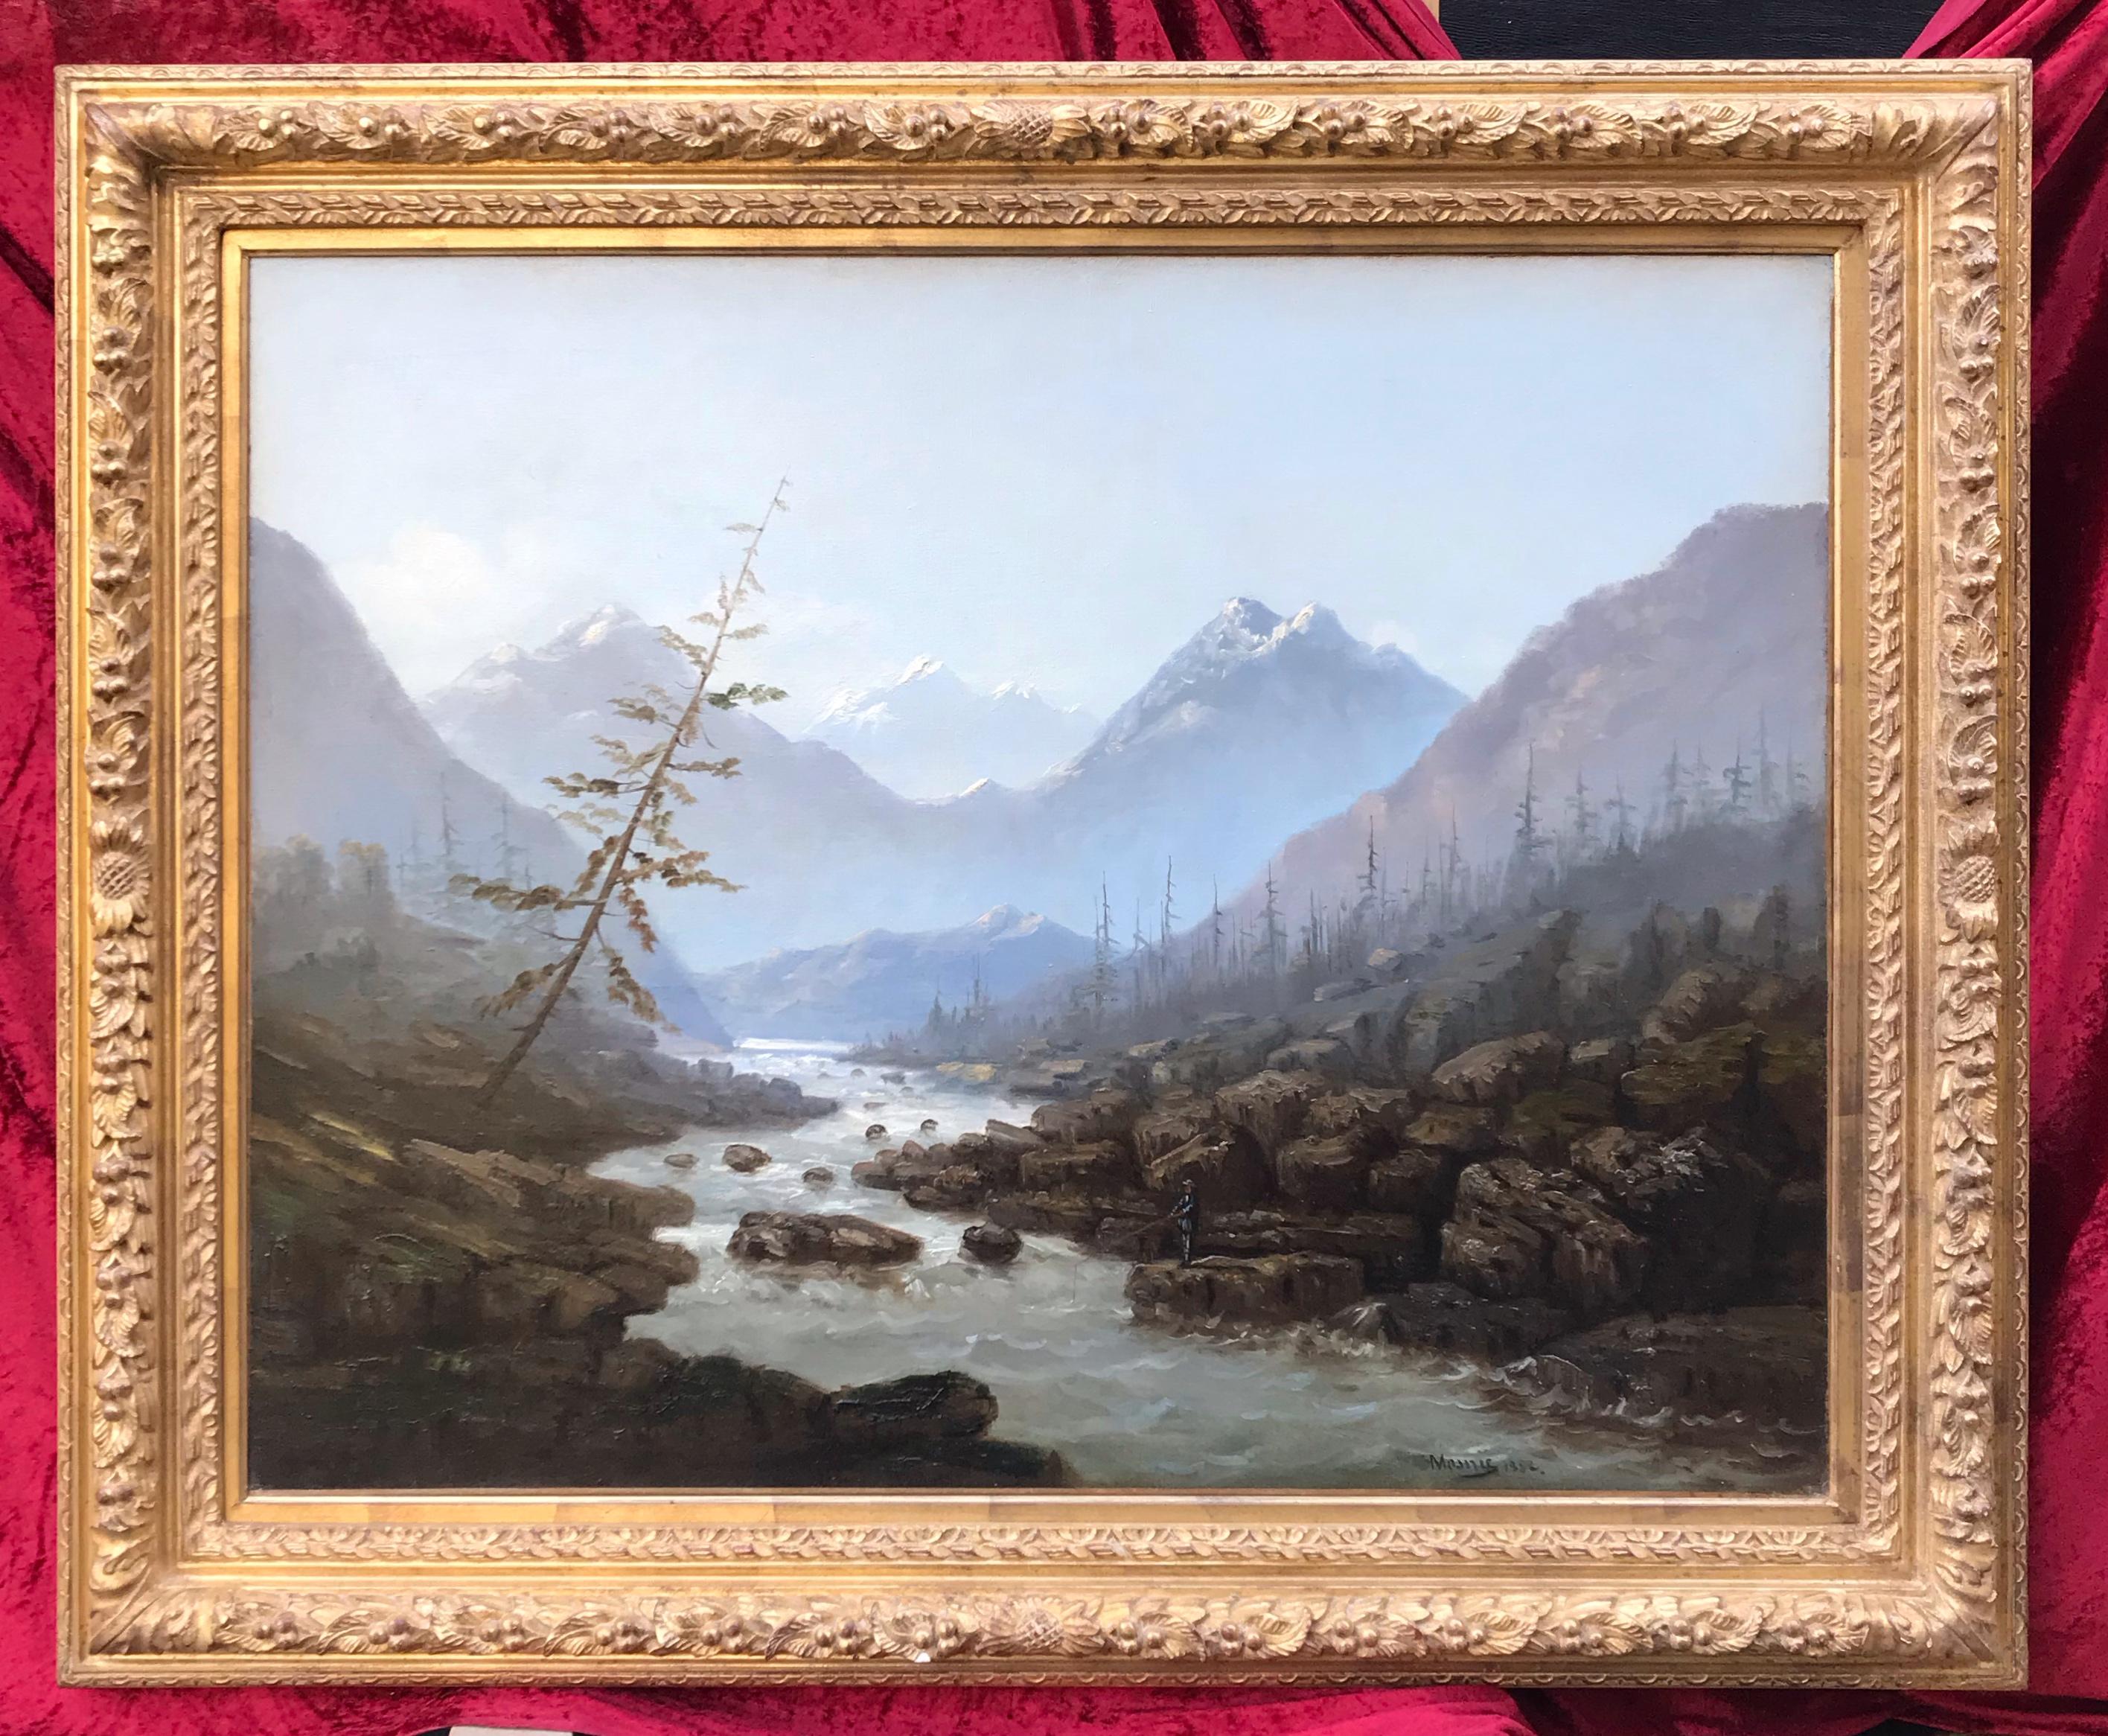 Landscape By The Mountain Stream